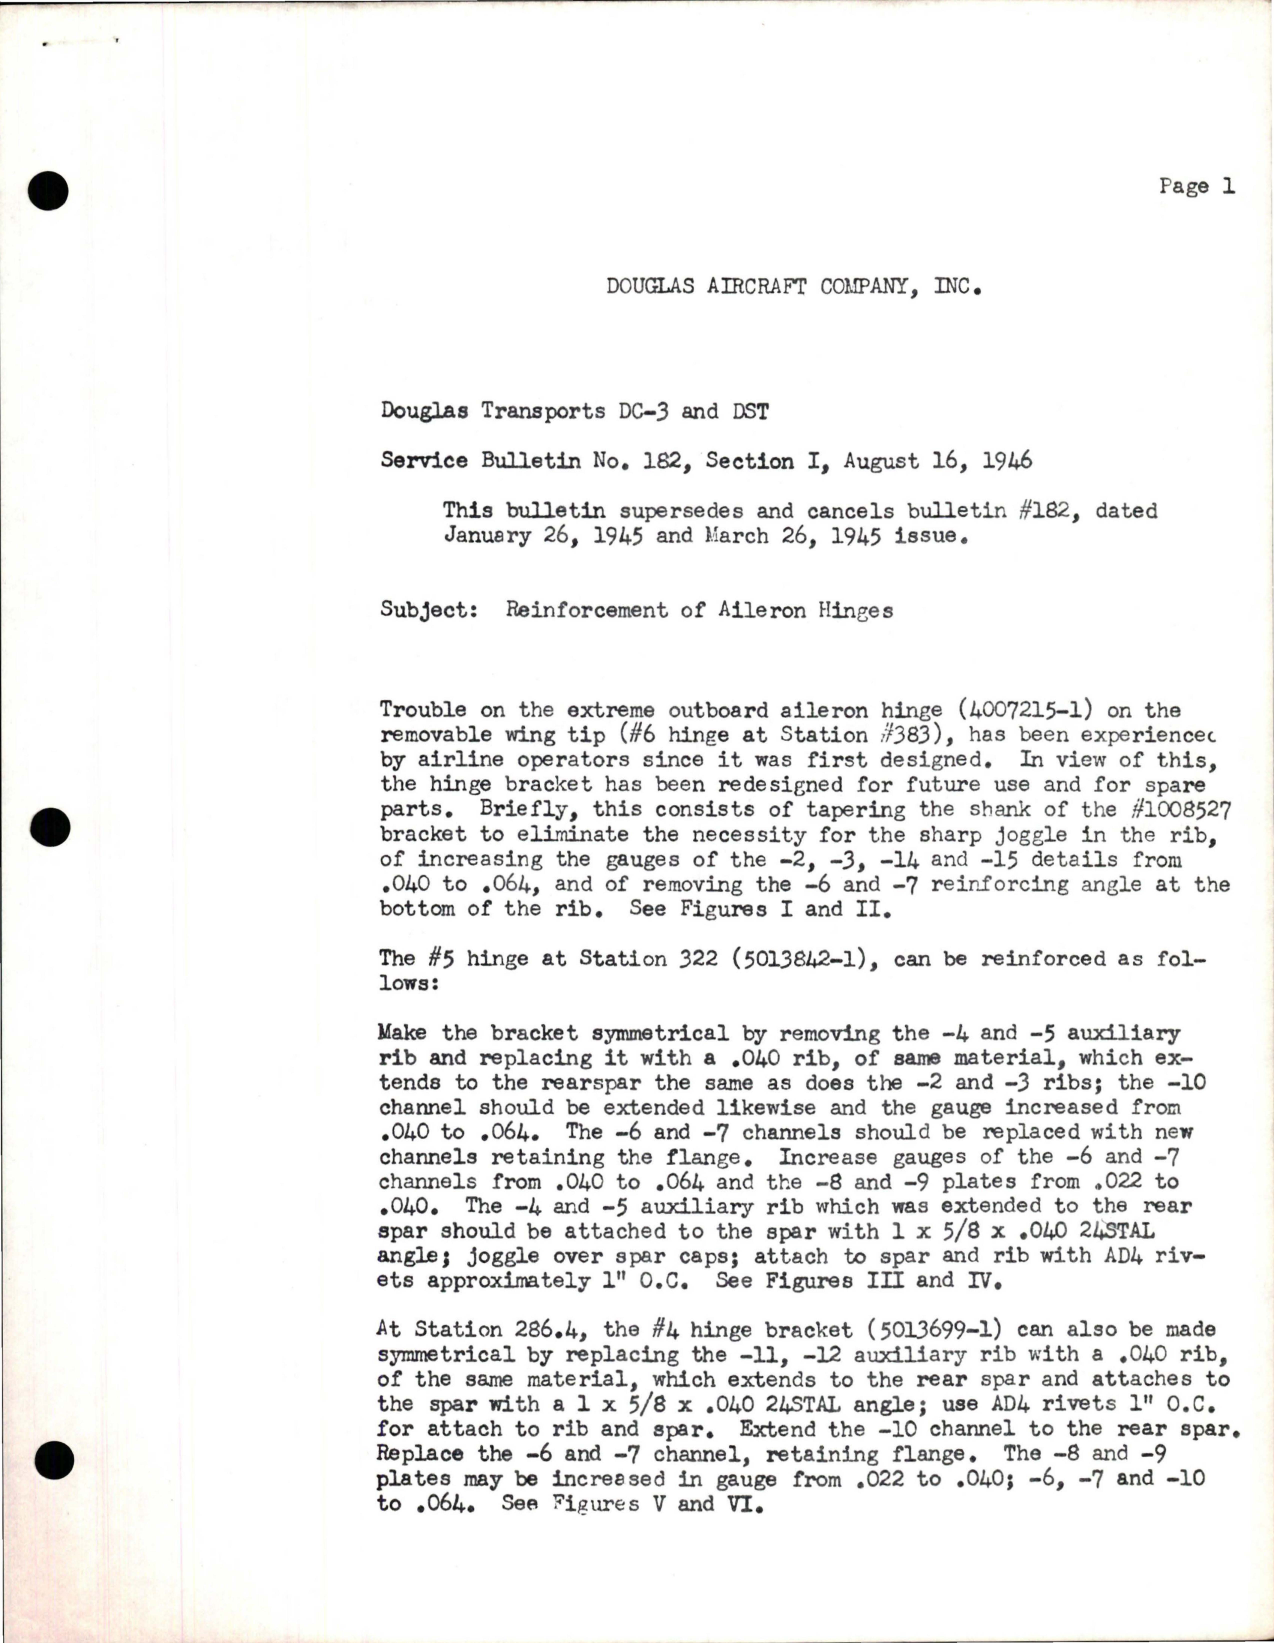 Sample page 1 from AirCorps Library document: Reinforcement of Aileron Hinges